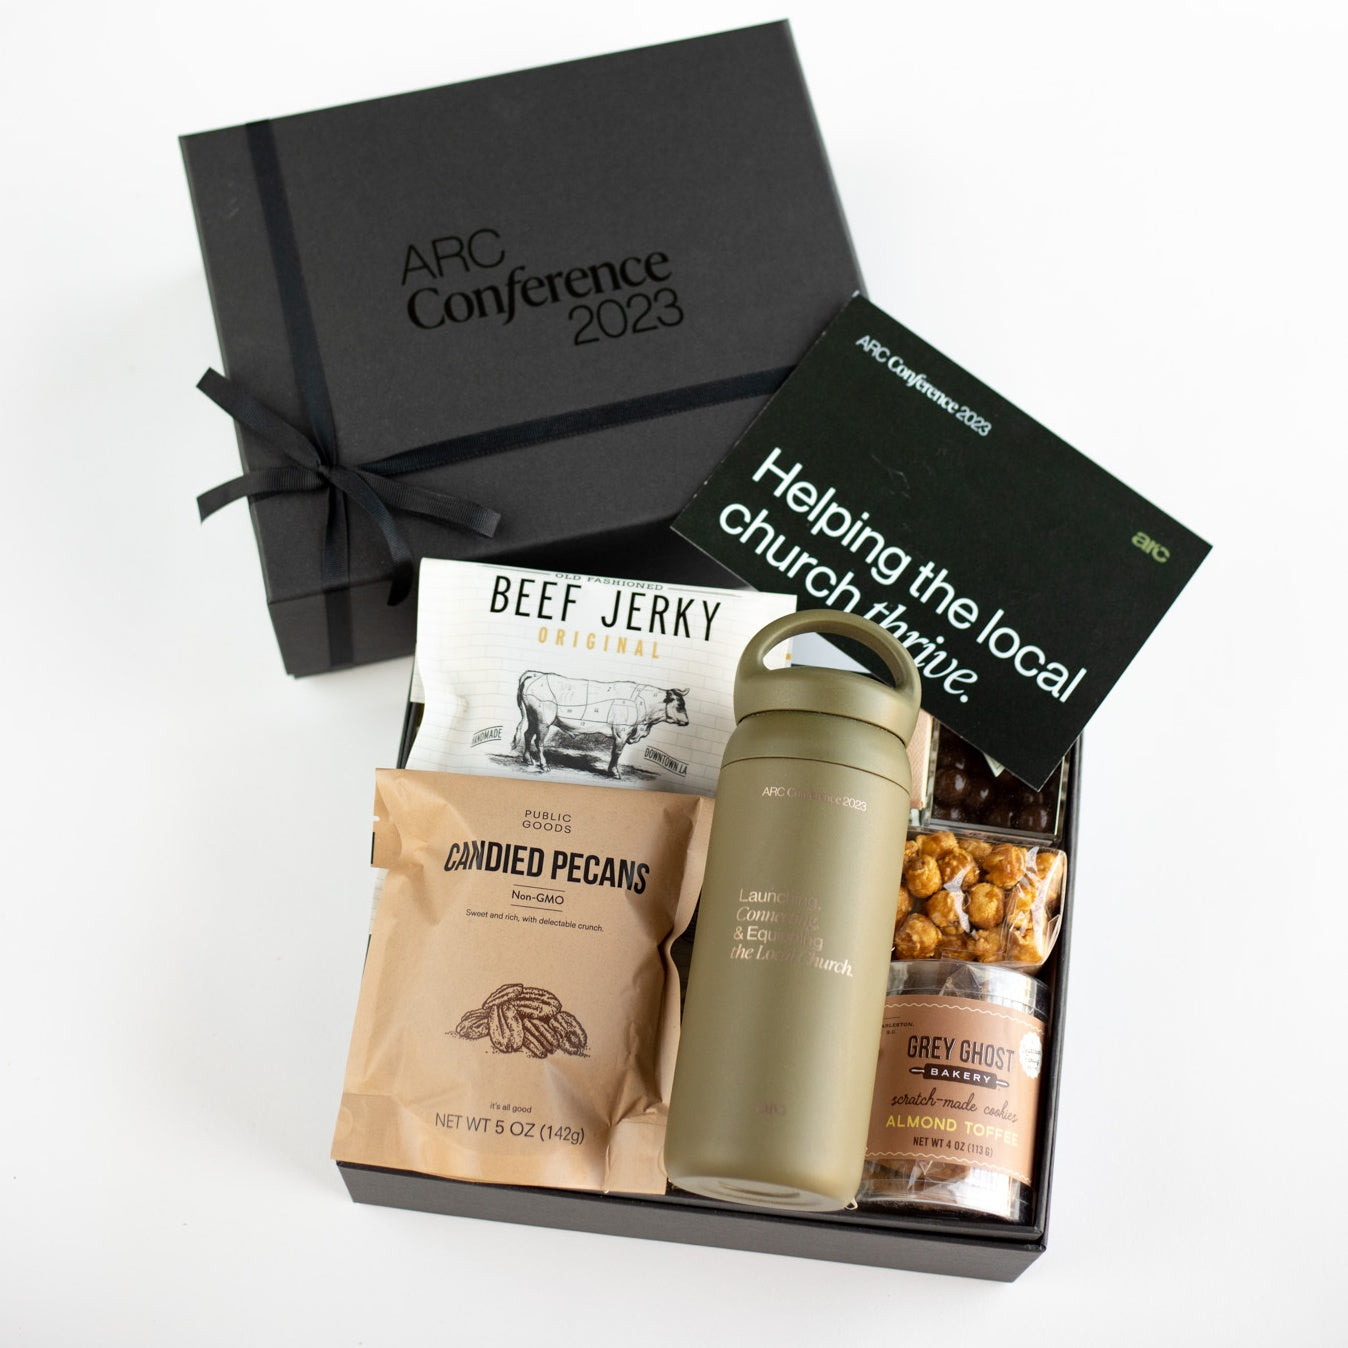 Corporate Gifting How To’s: BOXFOX’s guide to Personalized Corporate Gifting